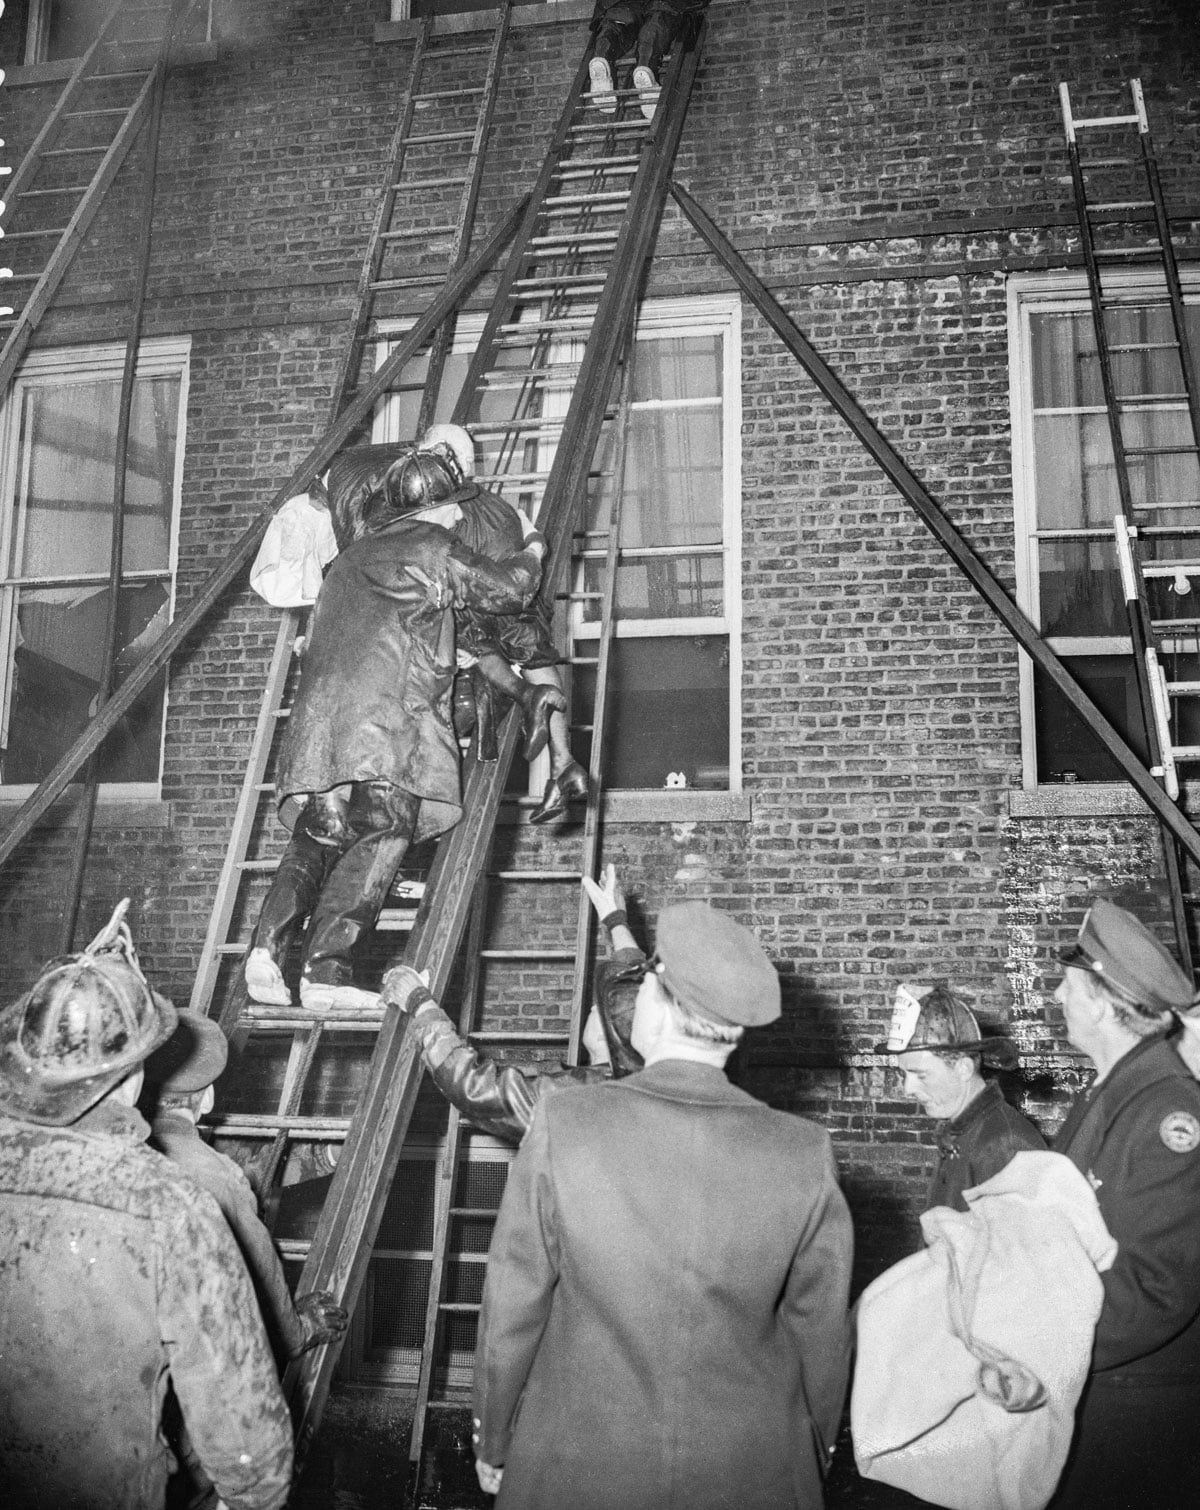 A firefighter rescues a nun from the building